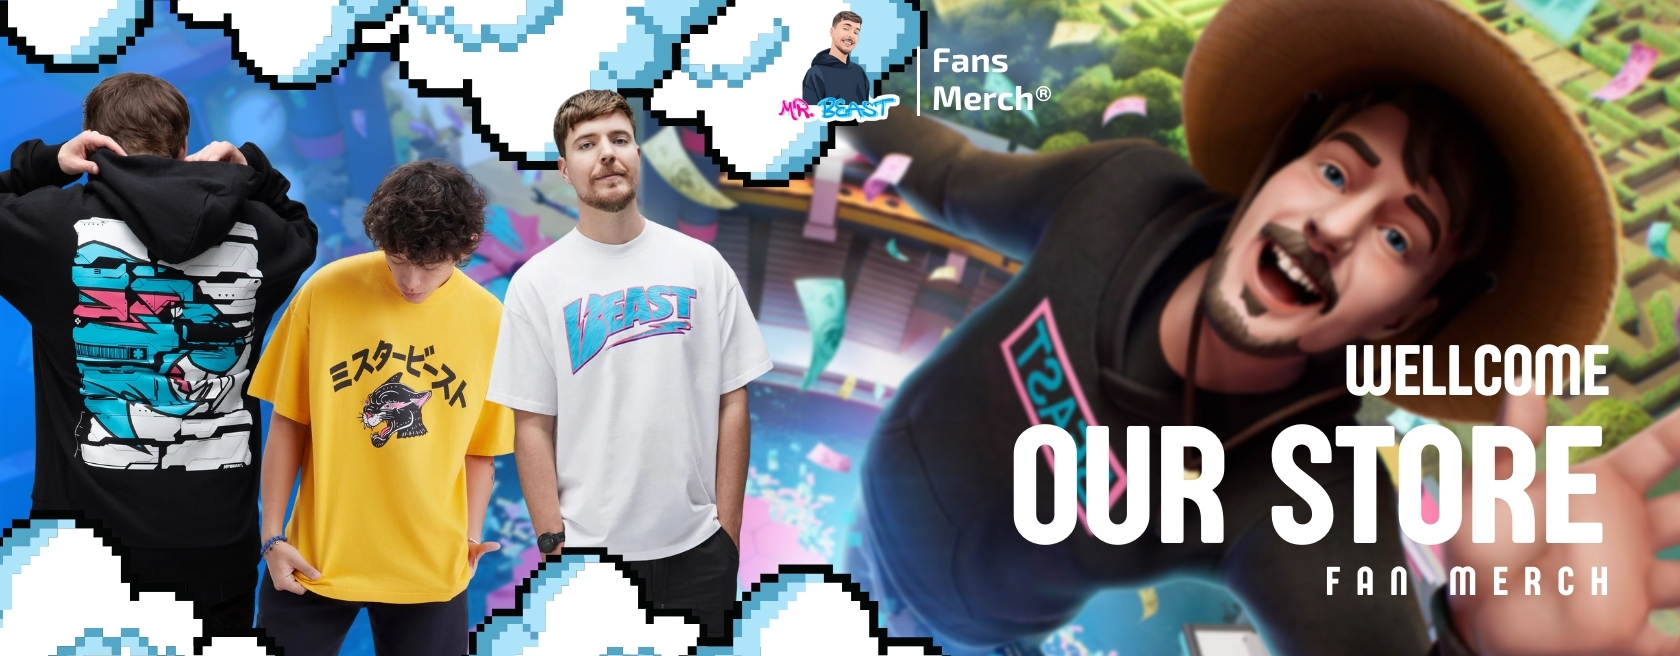 Banner Page 1 - Mr Beast Shop